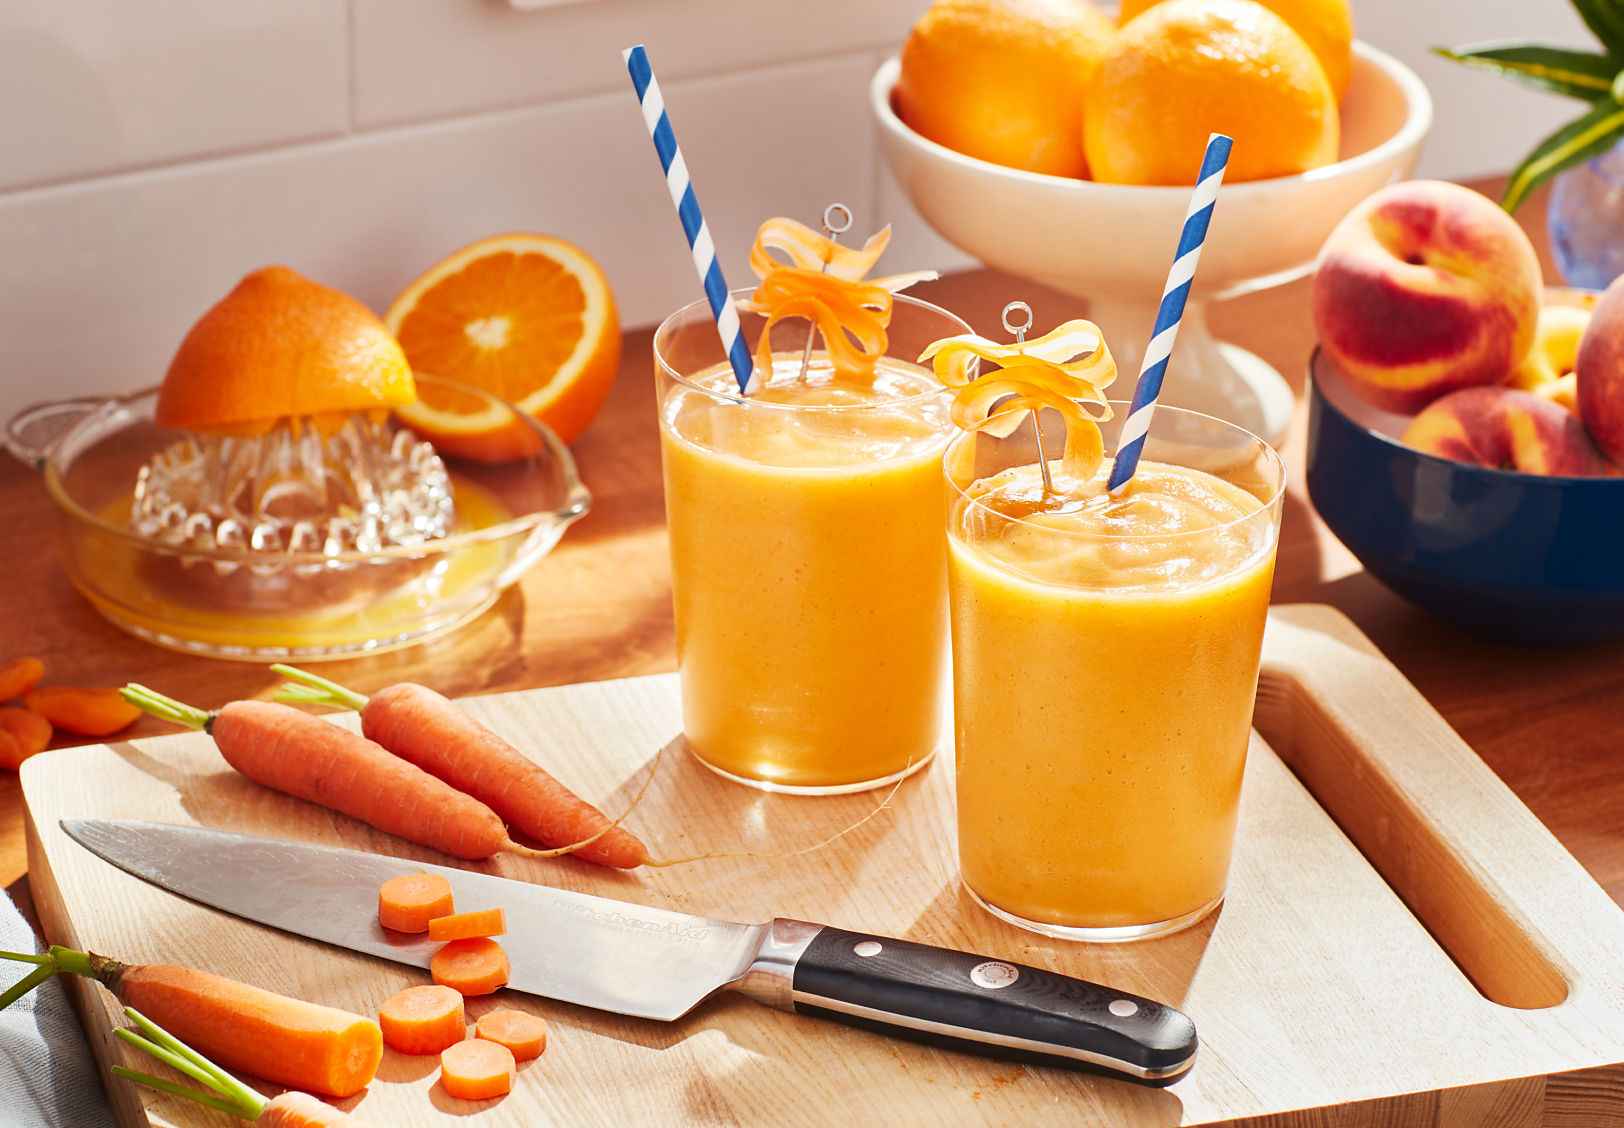 Glasses of orange juice with decorative straws on cutting board with carrots